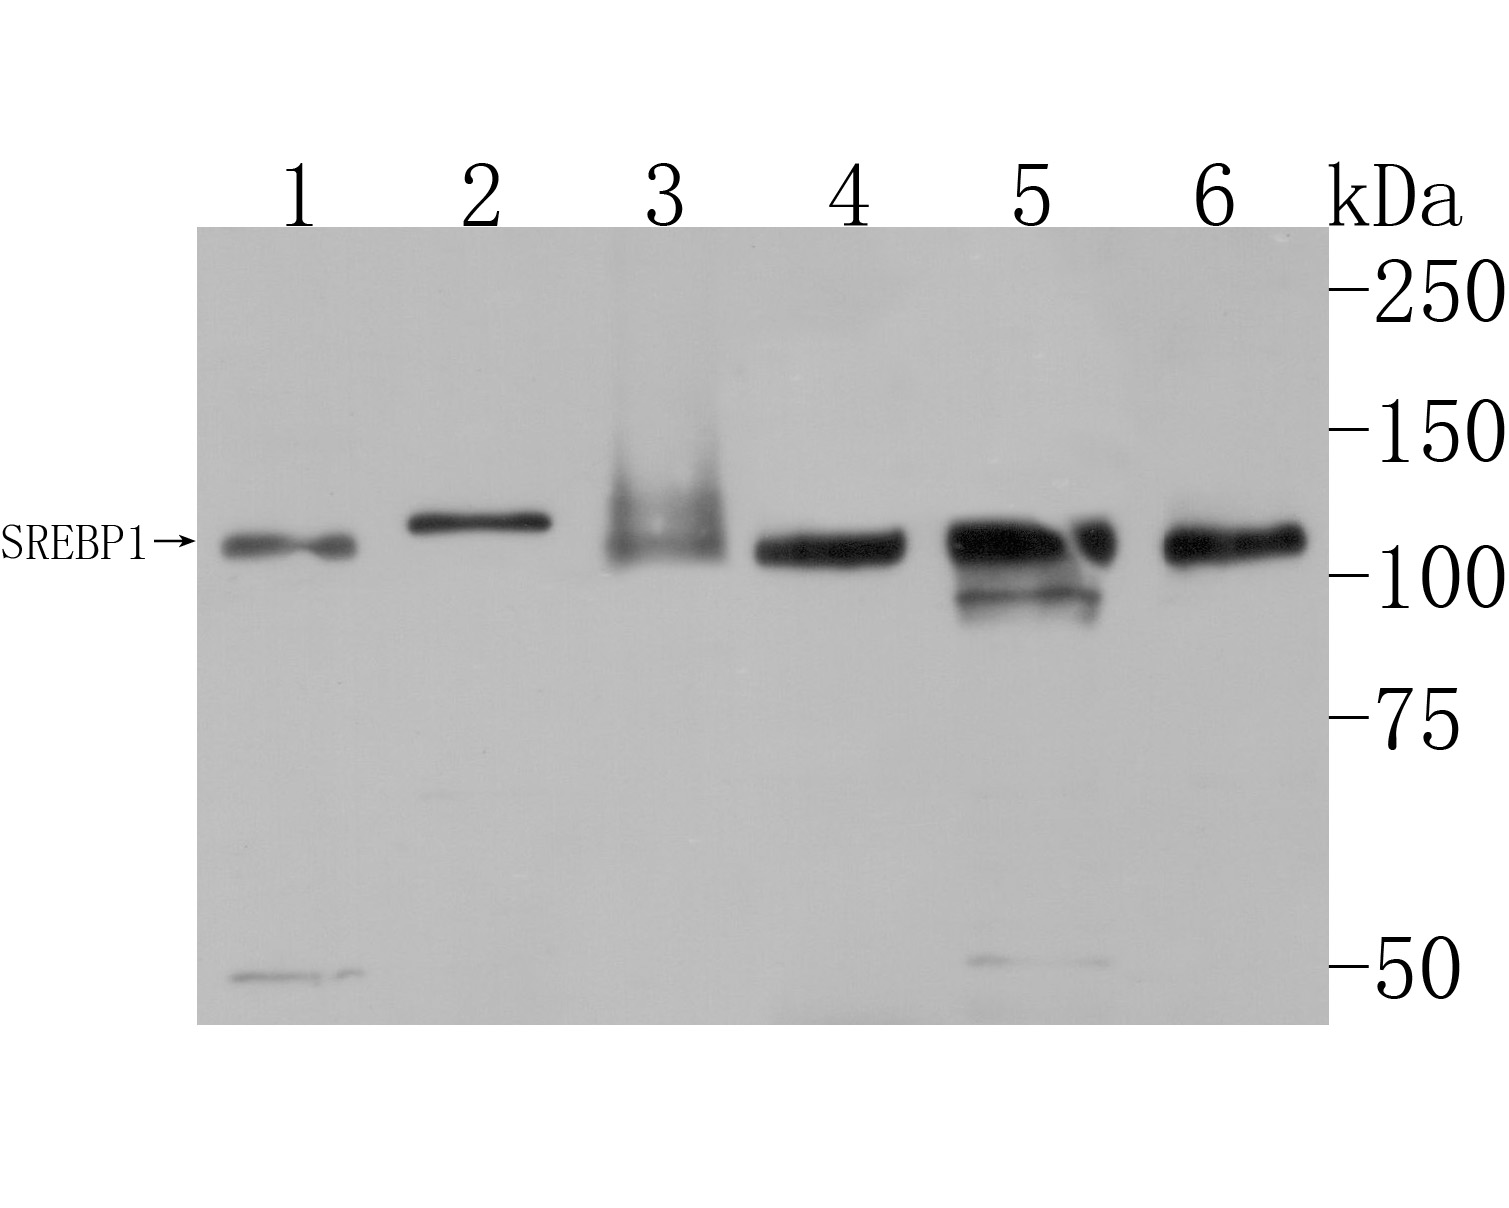 Western blot analysis of SREBP1 on different lysates. Proteins were transferred to a PVDF membrane and blocked with 5% BSA in PBS for 1 hour at room temperature. The primary antibody (HA500210, 1/500) was used in 5% BSA at room temperature for 2 hours. Goat Anti-Rabbit IgG - HRP Secondary Antibody (HA1001) at 1:200,000 dilution was used for 1 hour at room temperature.<br />
Positive control: <br />
Lane 1: HepG2 cell lysate<br />
Lane 2: Mouse heart tissue lysate<br />
Lane 3: Mouse liver tissue lysate<br />
Lane 4: 293 cell lysate<br />
Lane 5: Jurkat cell lysate<br />
Lane 6: A549 cell lysate